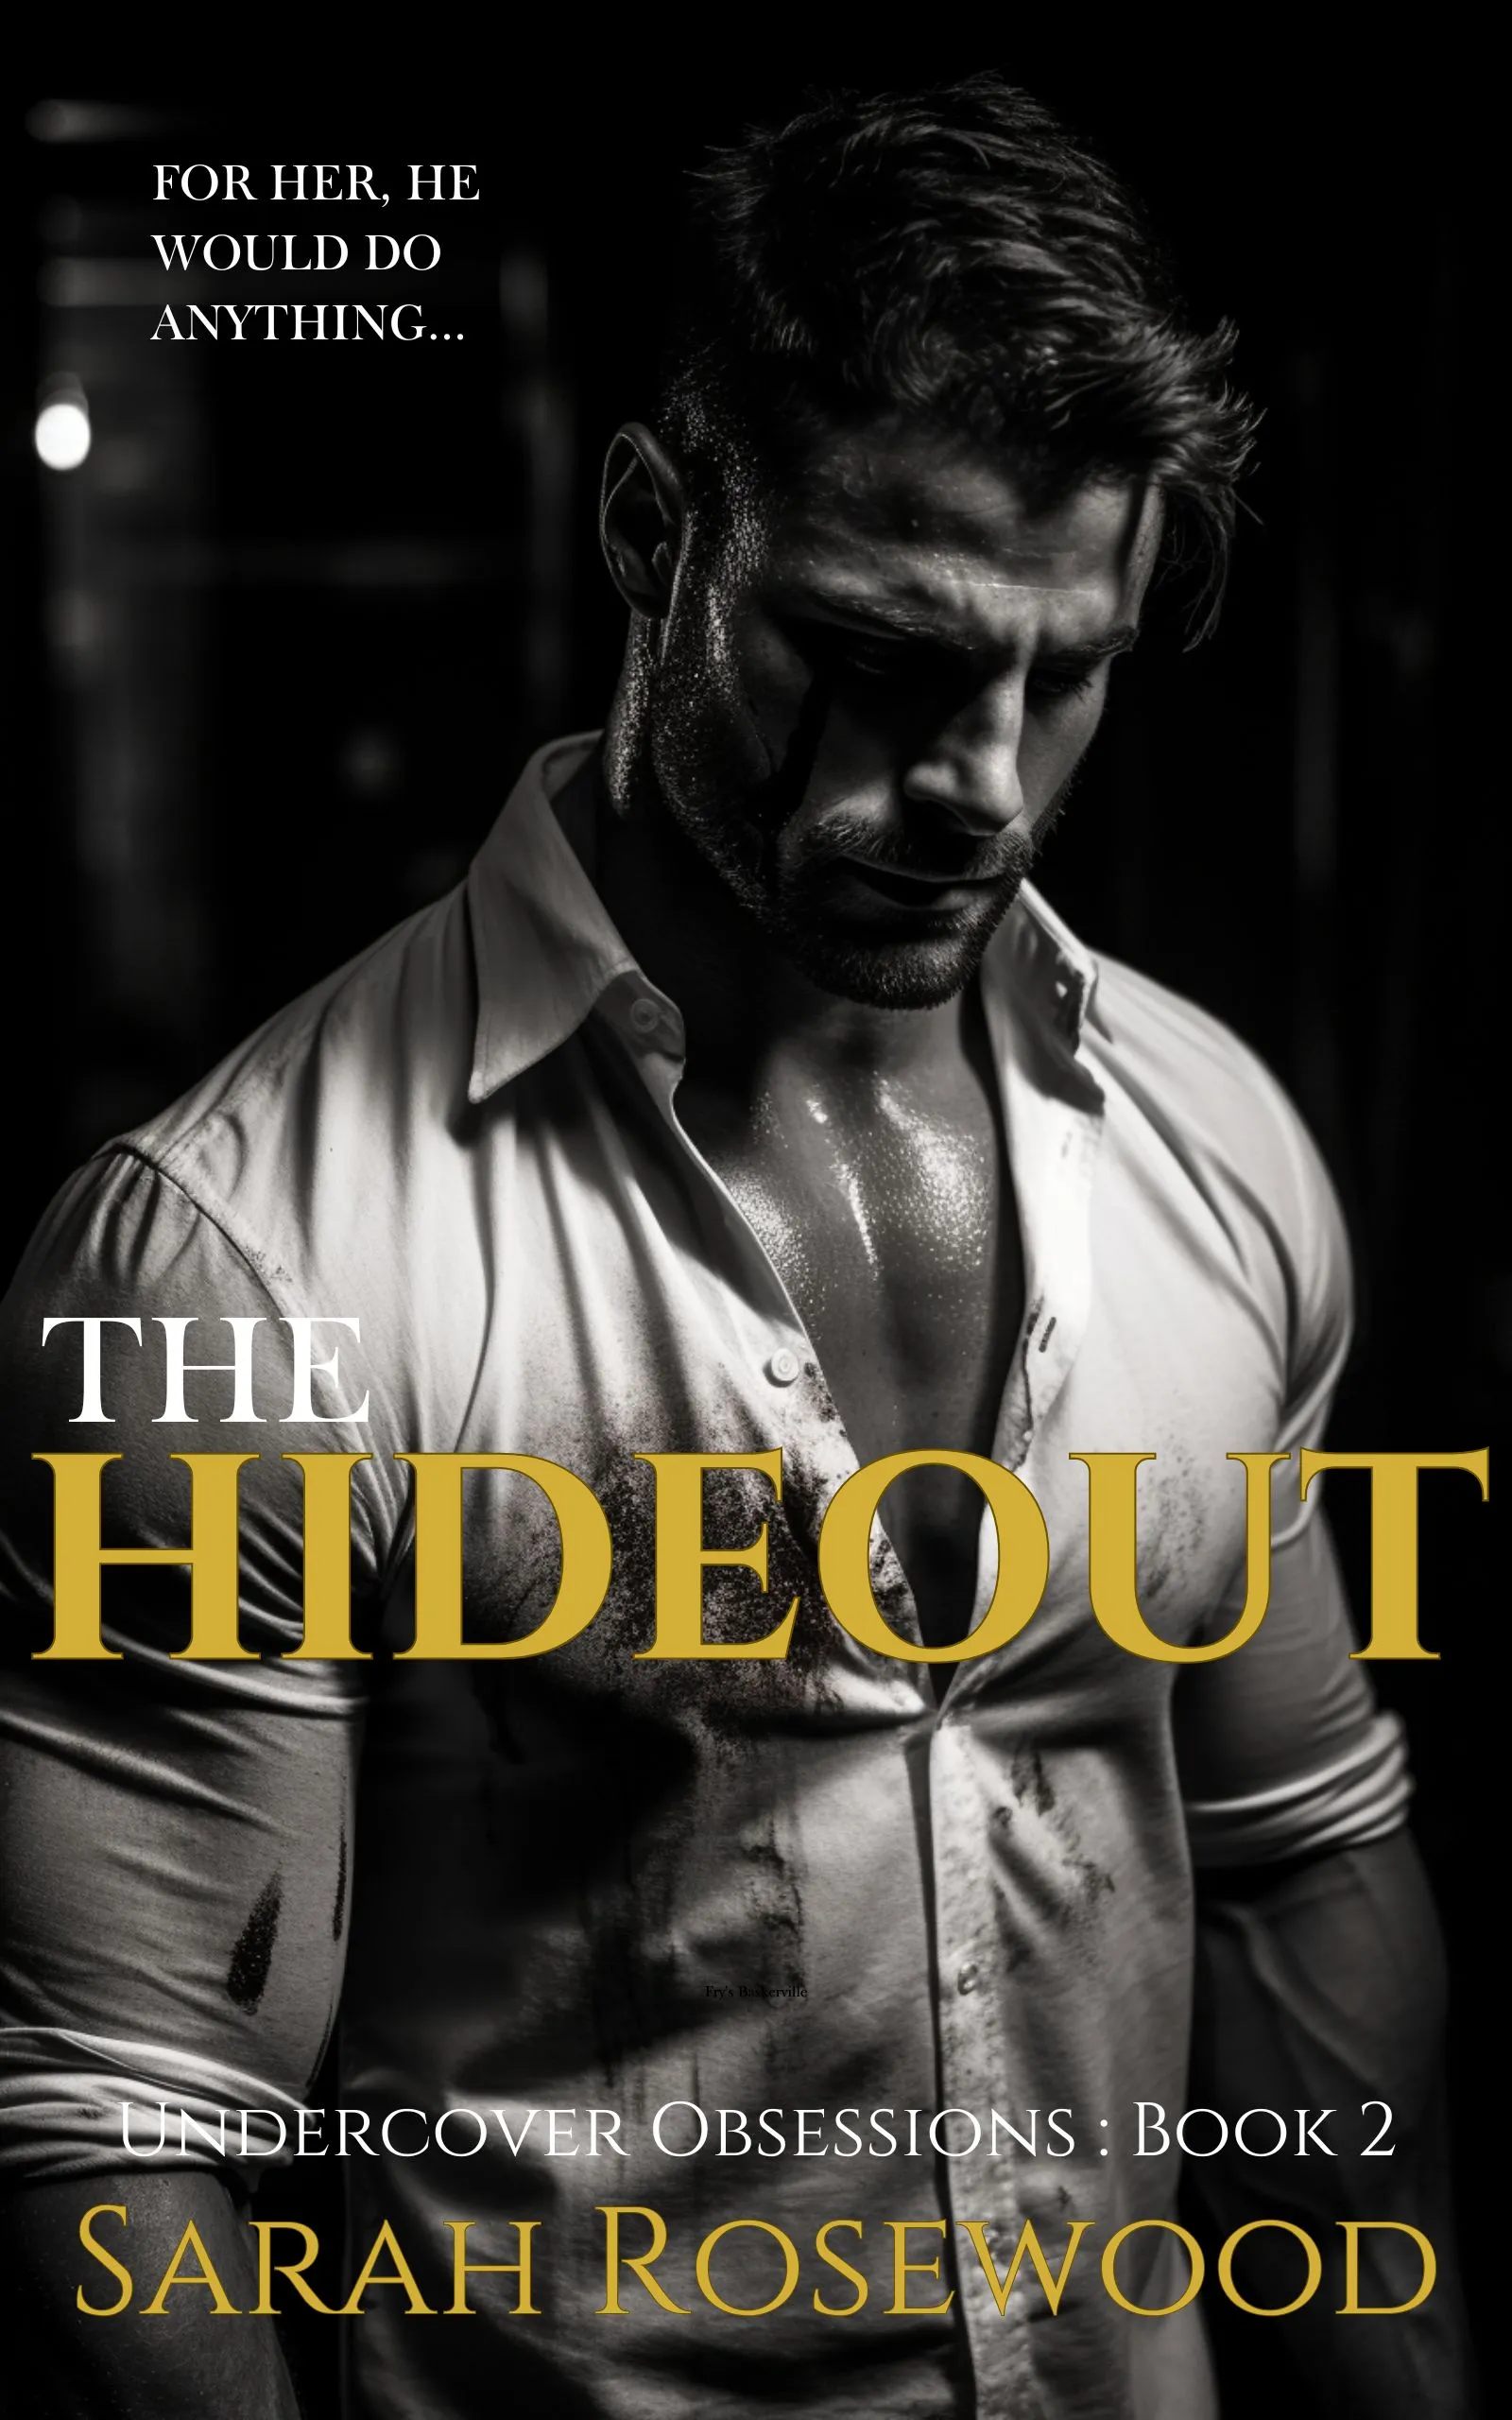 The Hideout by Sarah Rosewood